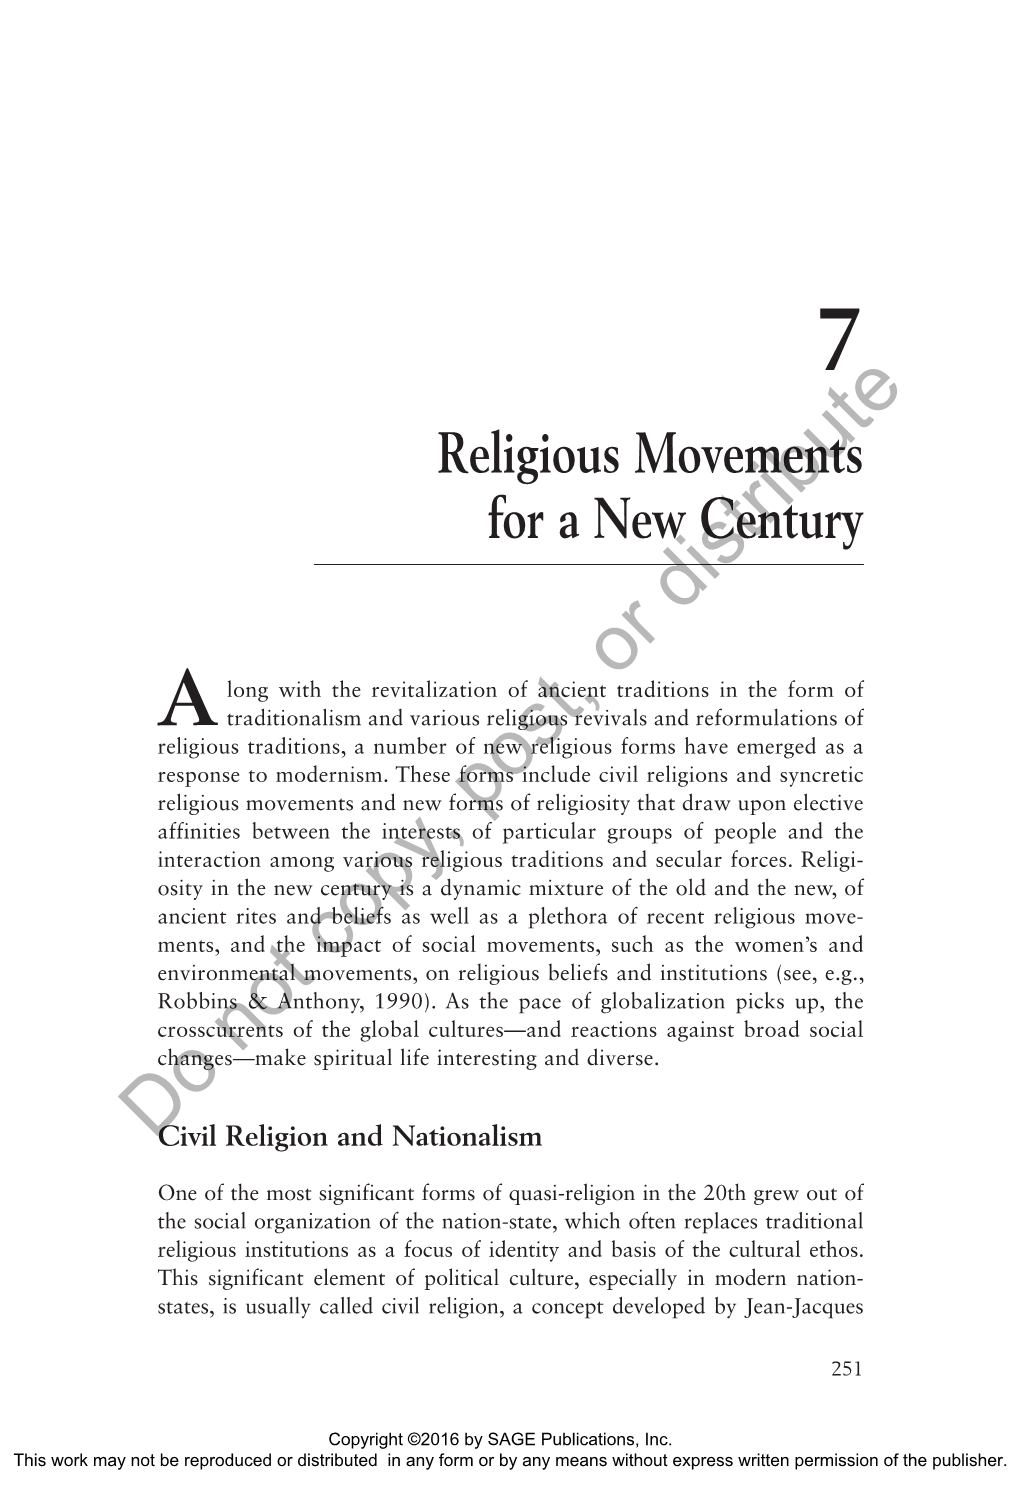 Religious Movements for a New Century Distribute